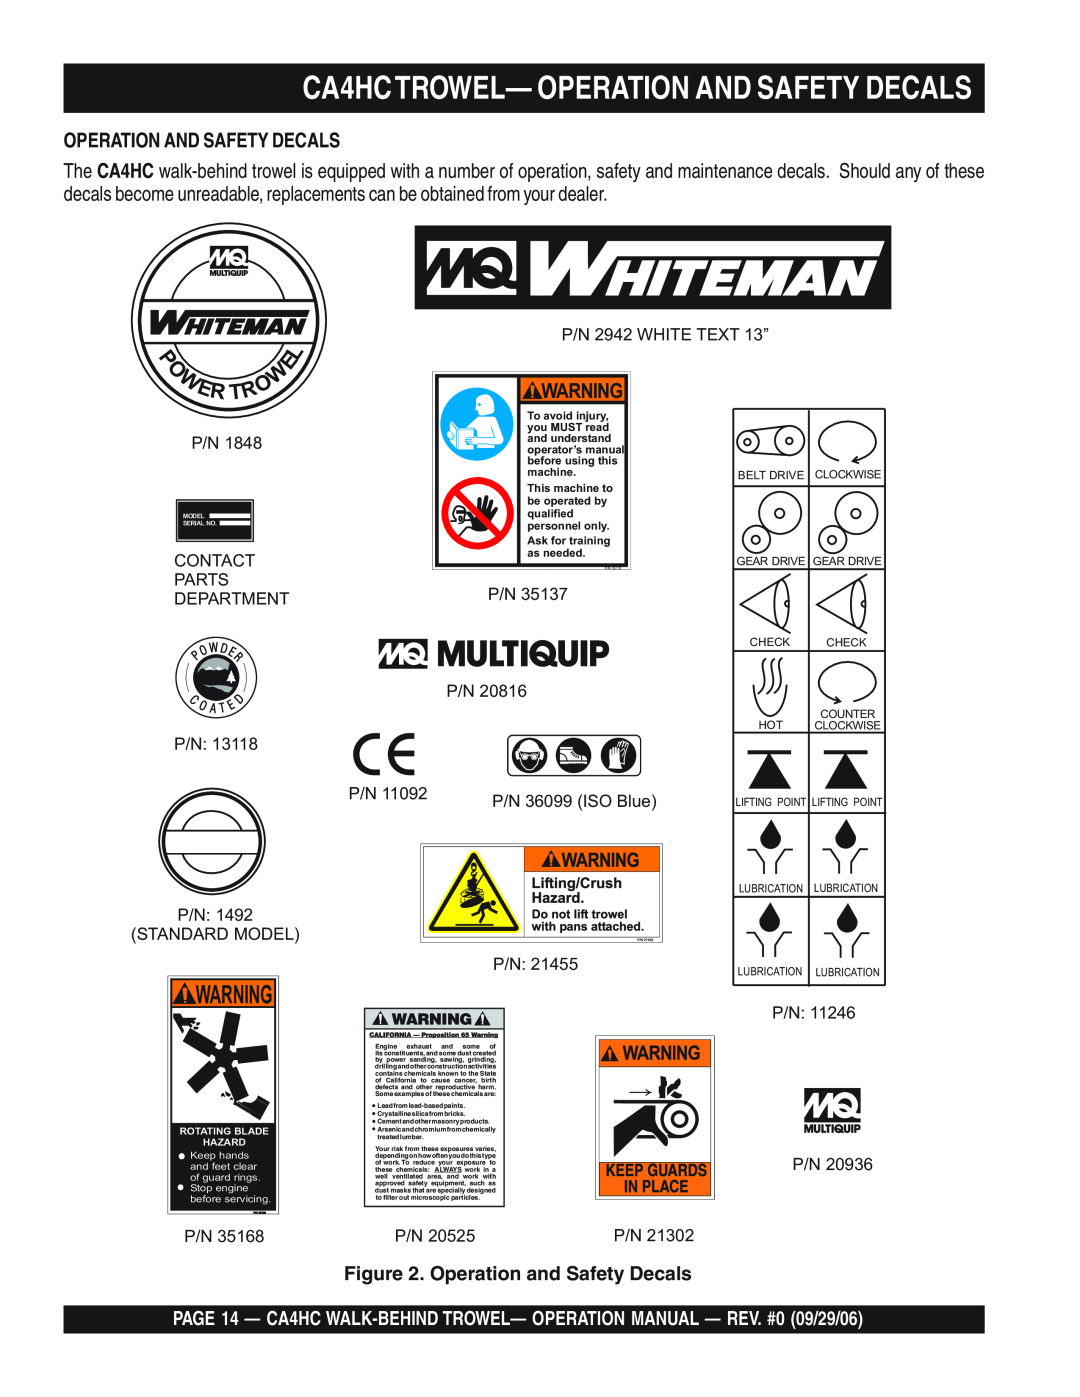 Multiquip CA4HCTROWEL— OPERATION AND SAFETY DECALS, R Tr, Operation And Safety Decals, Operation and Safety Decals 